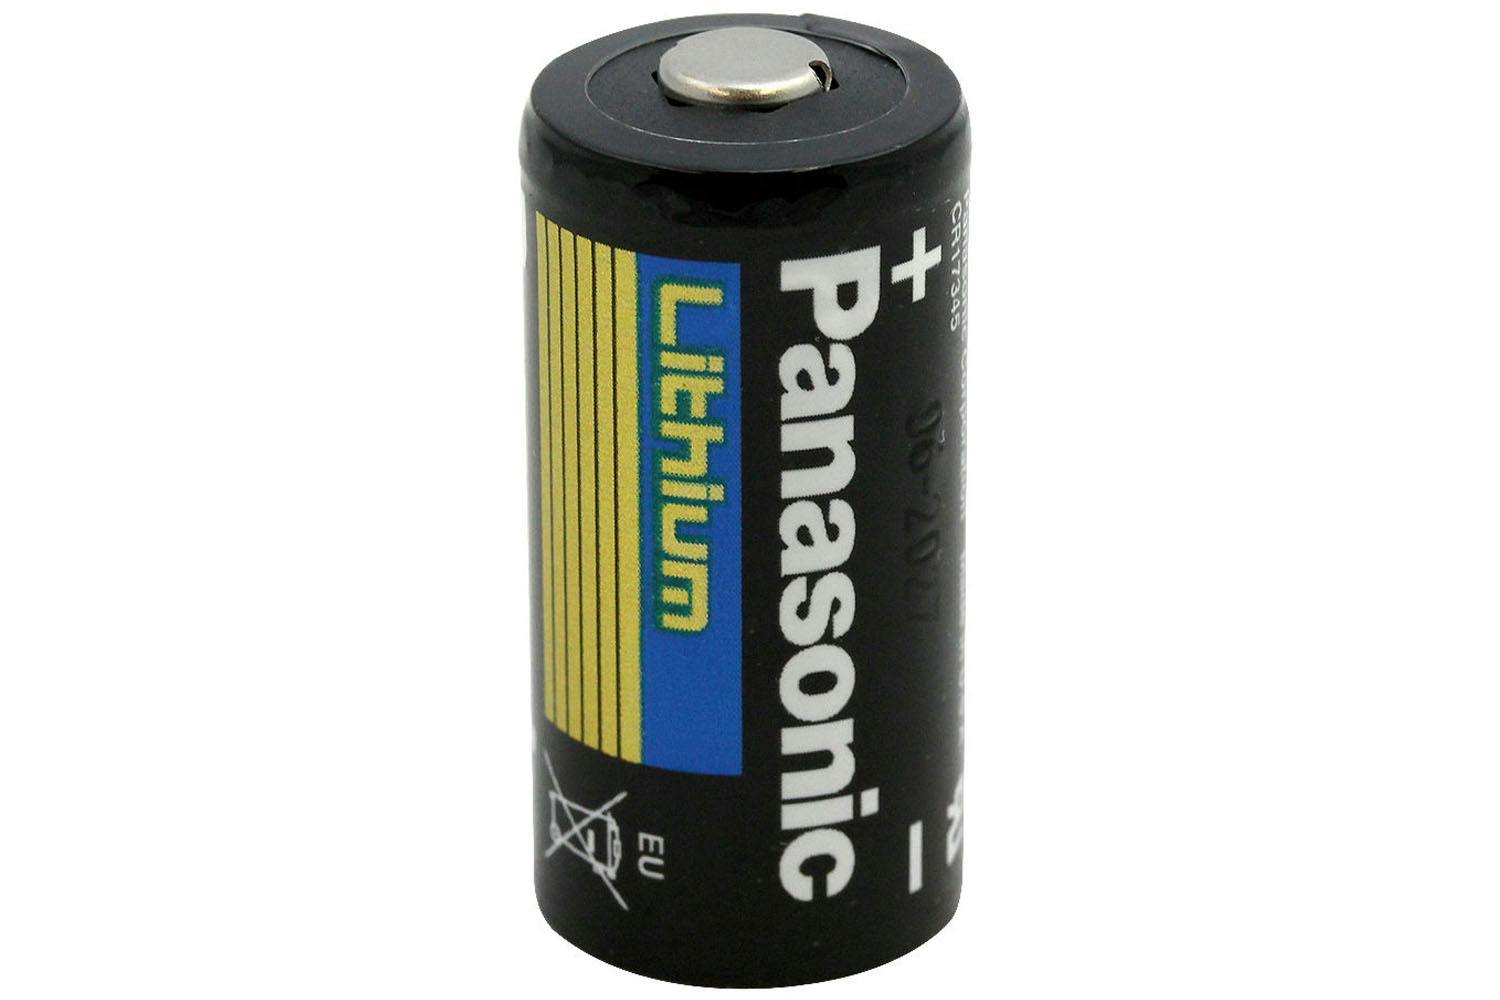 Panasonic Lithium Camera Battery Cr123 for sale online